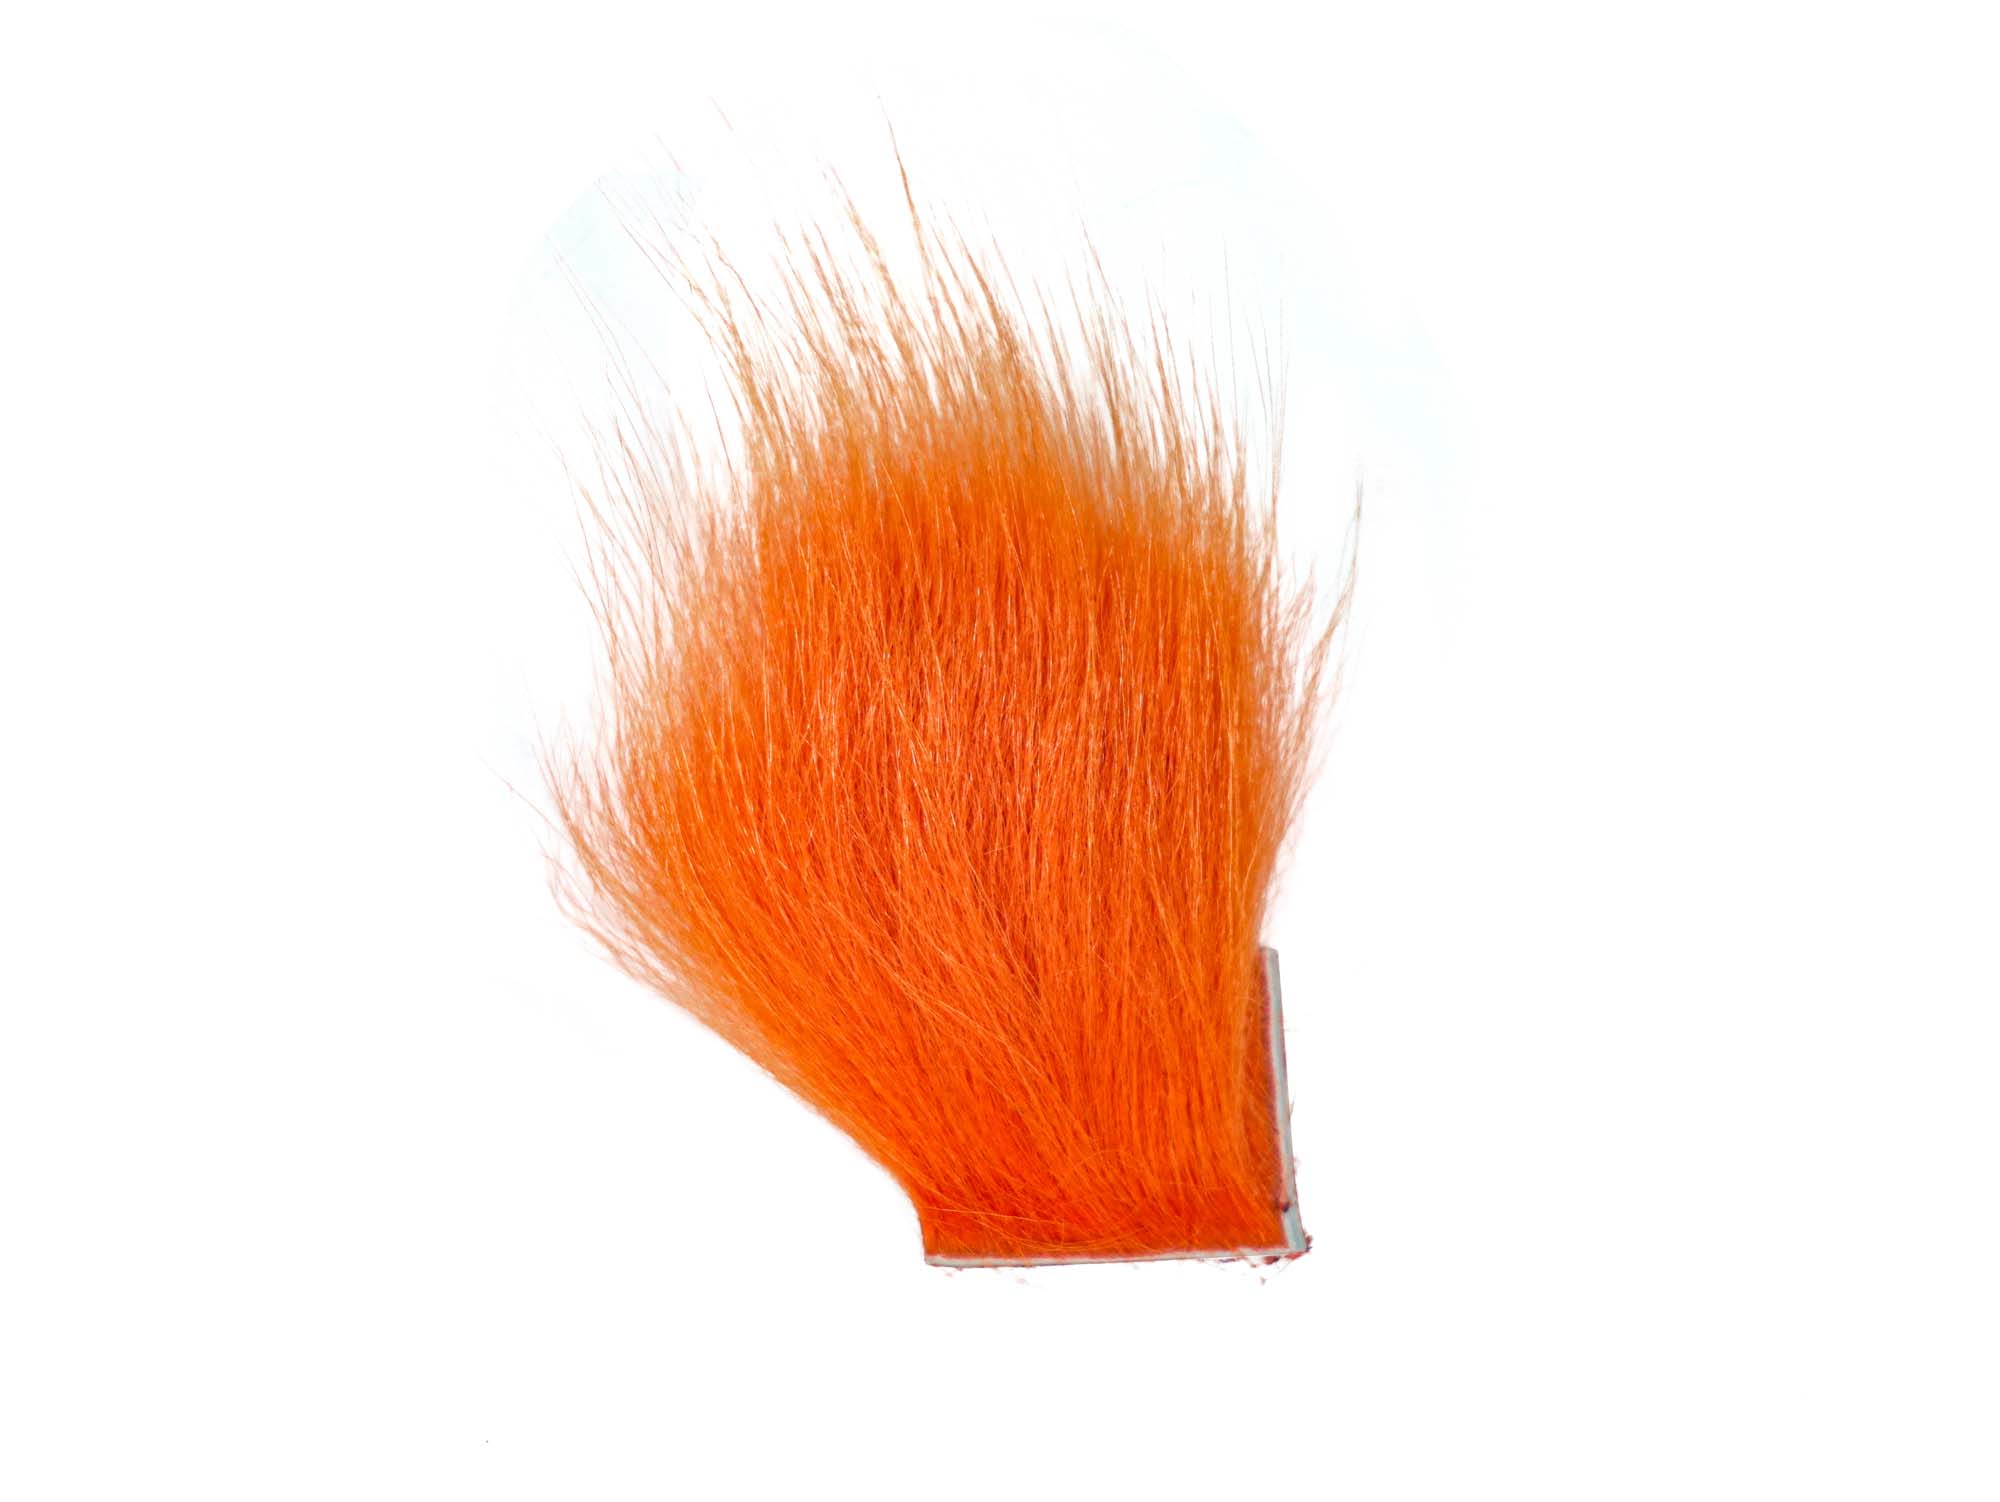 Dyed Arctic Runner Fly Fishing Piece: Orange - 1377-OR-AS (9UL4)